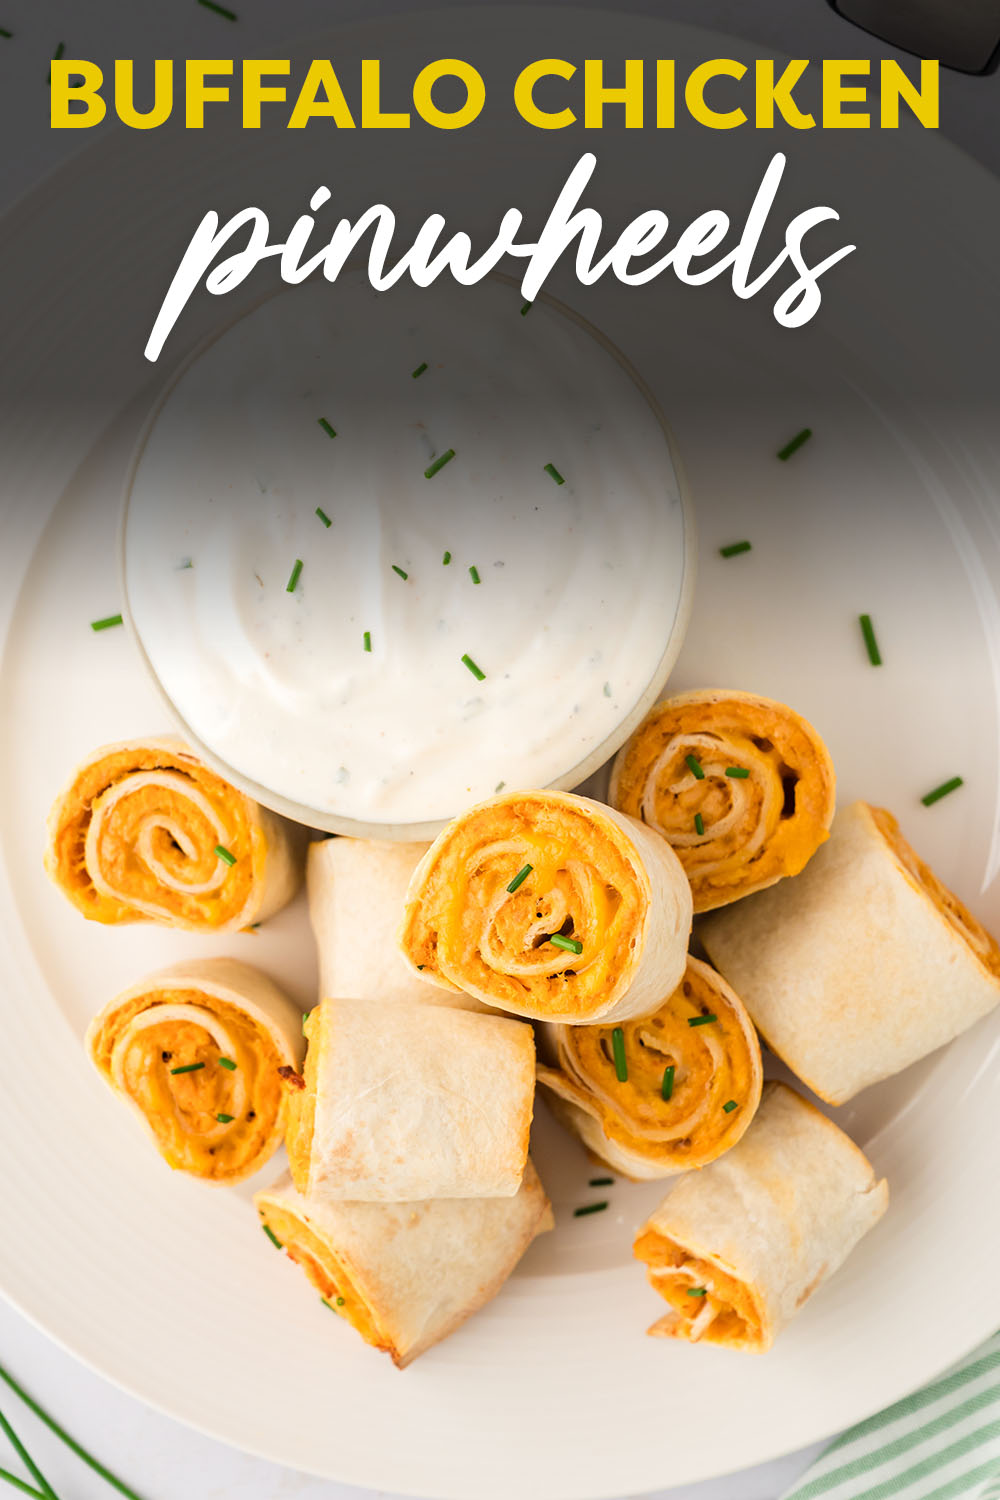 Our Buffalo chicken pinwheel recipe is full of wonderful flavor and is very easy to prepare!